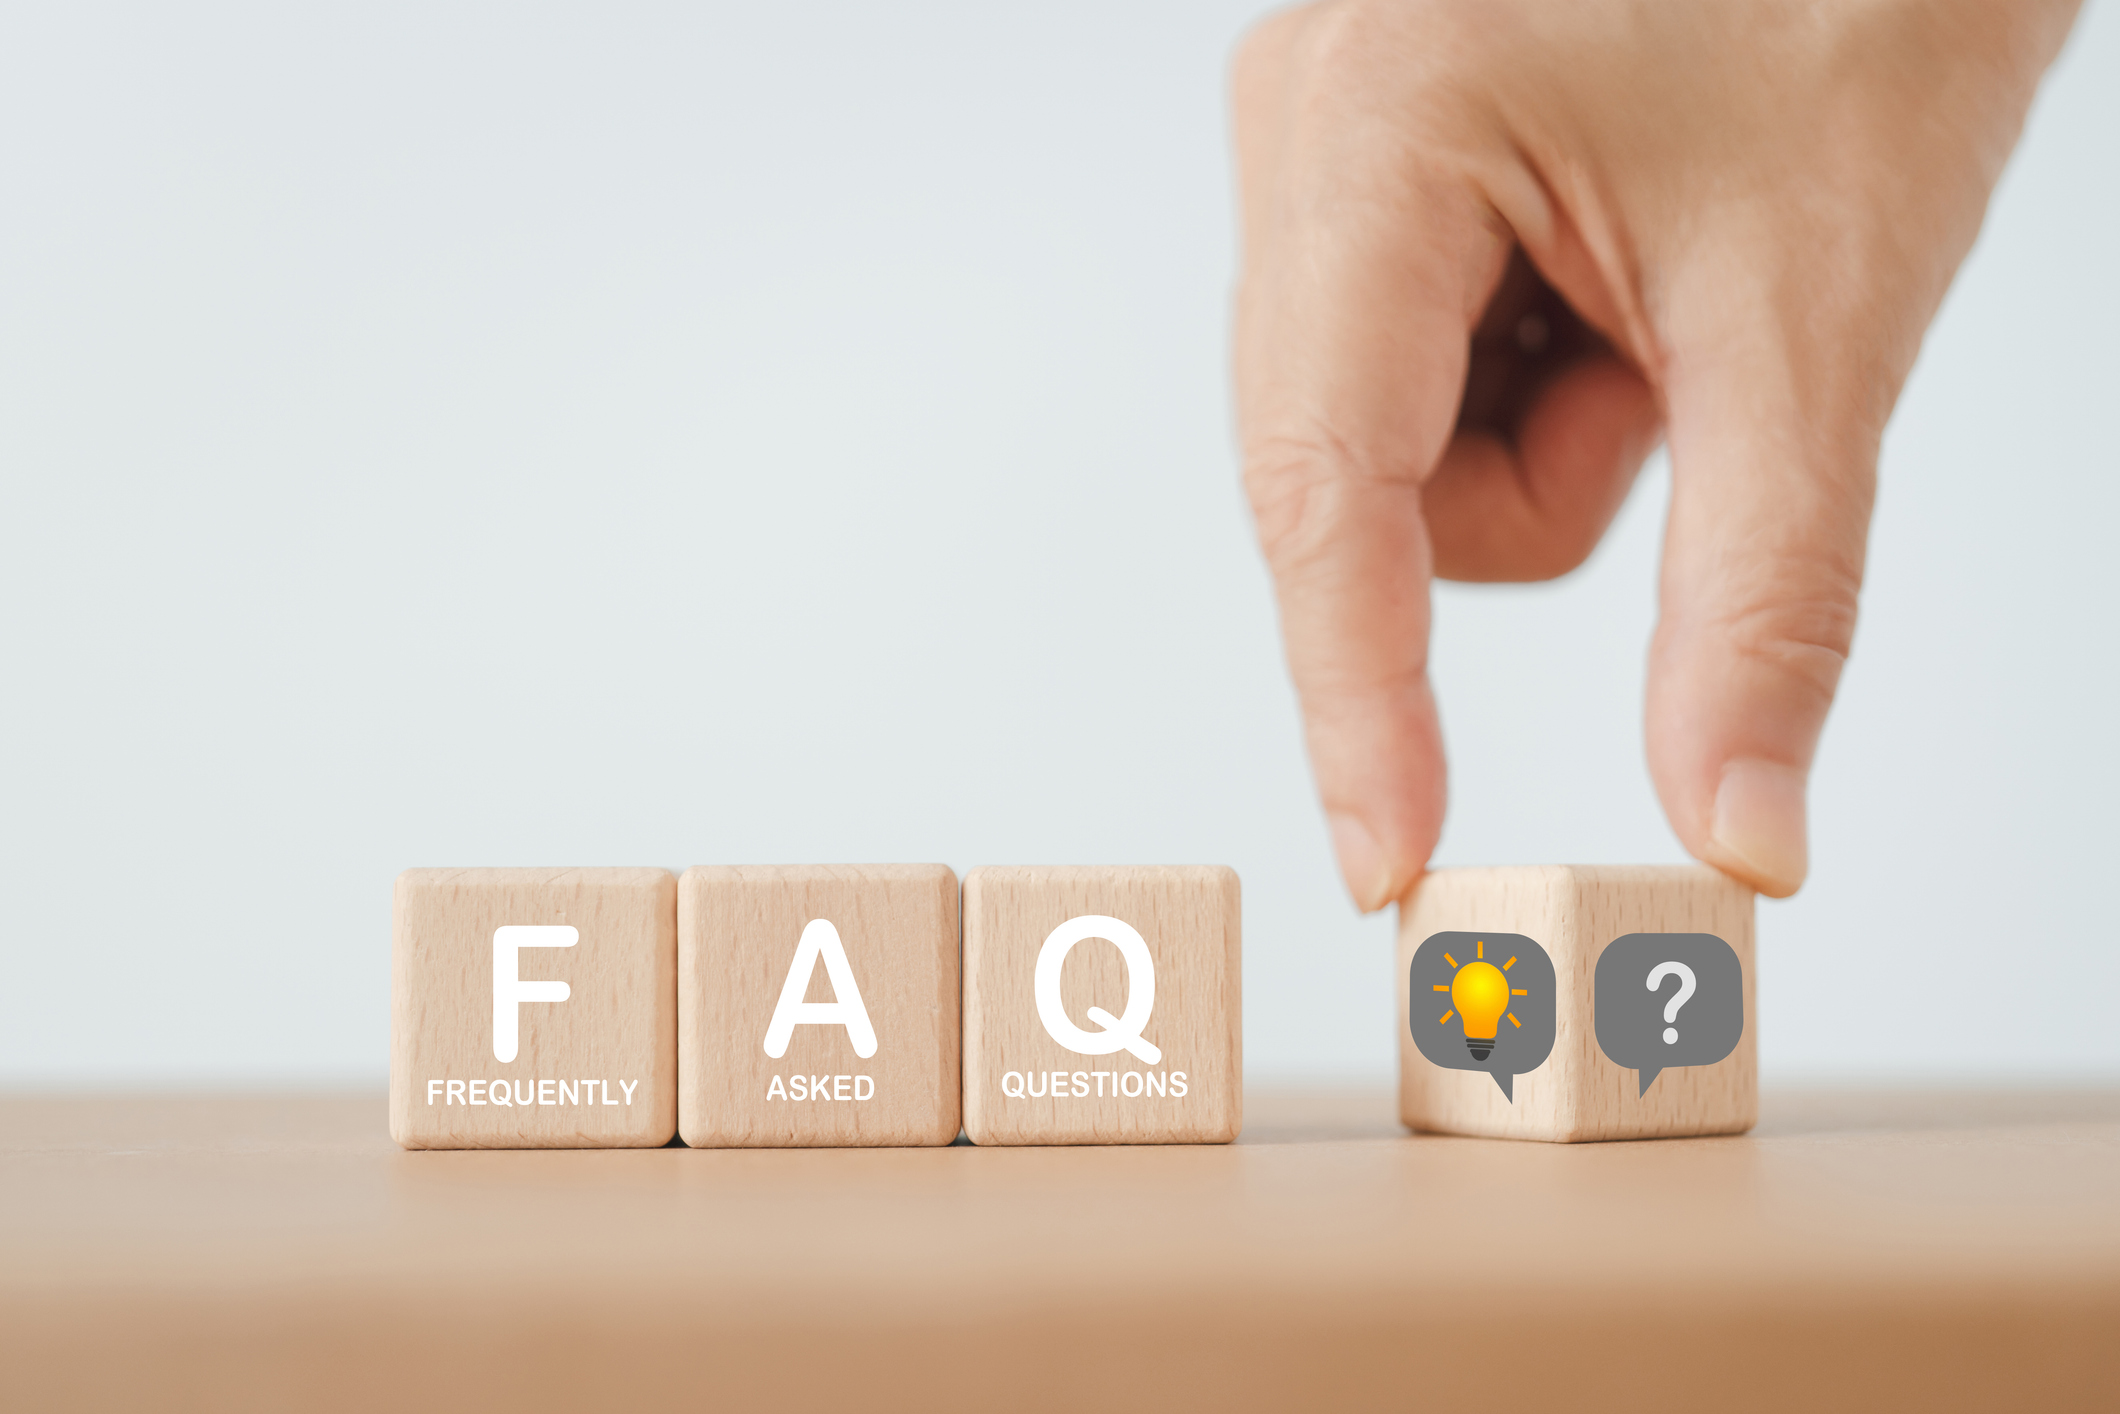 A plumber FAQ concept featuring frequently asked questions (FAQs) on various topics and their corresponding answers. The FAQs are displayed on wooden cube blocks, with a hand flipping a question to reveal a lightbulb.